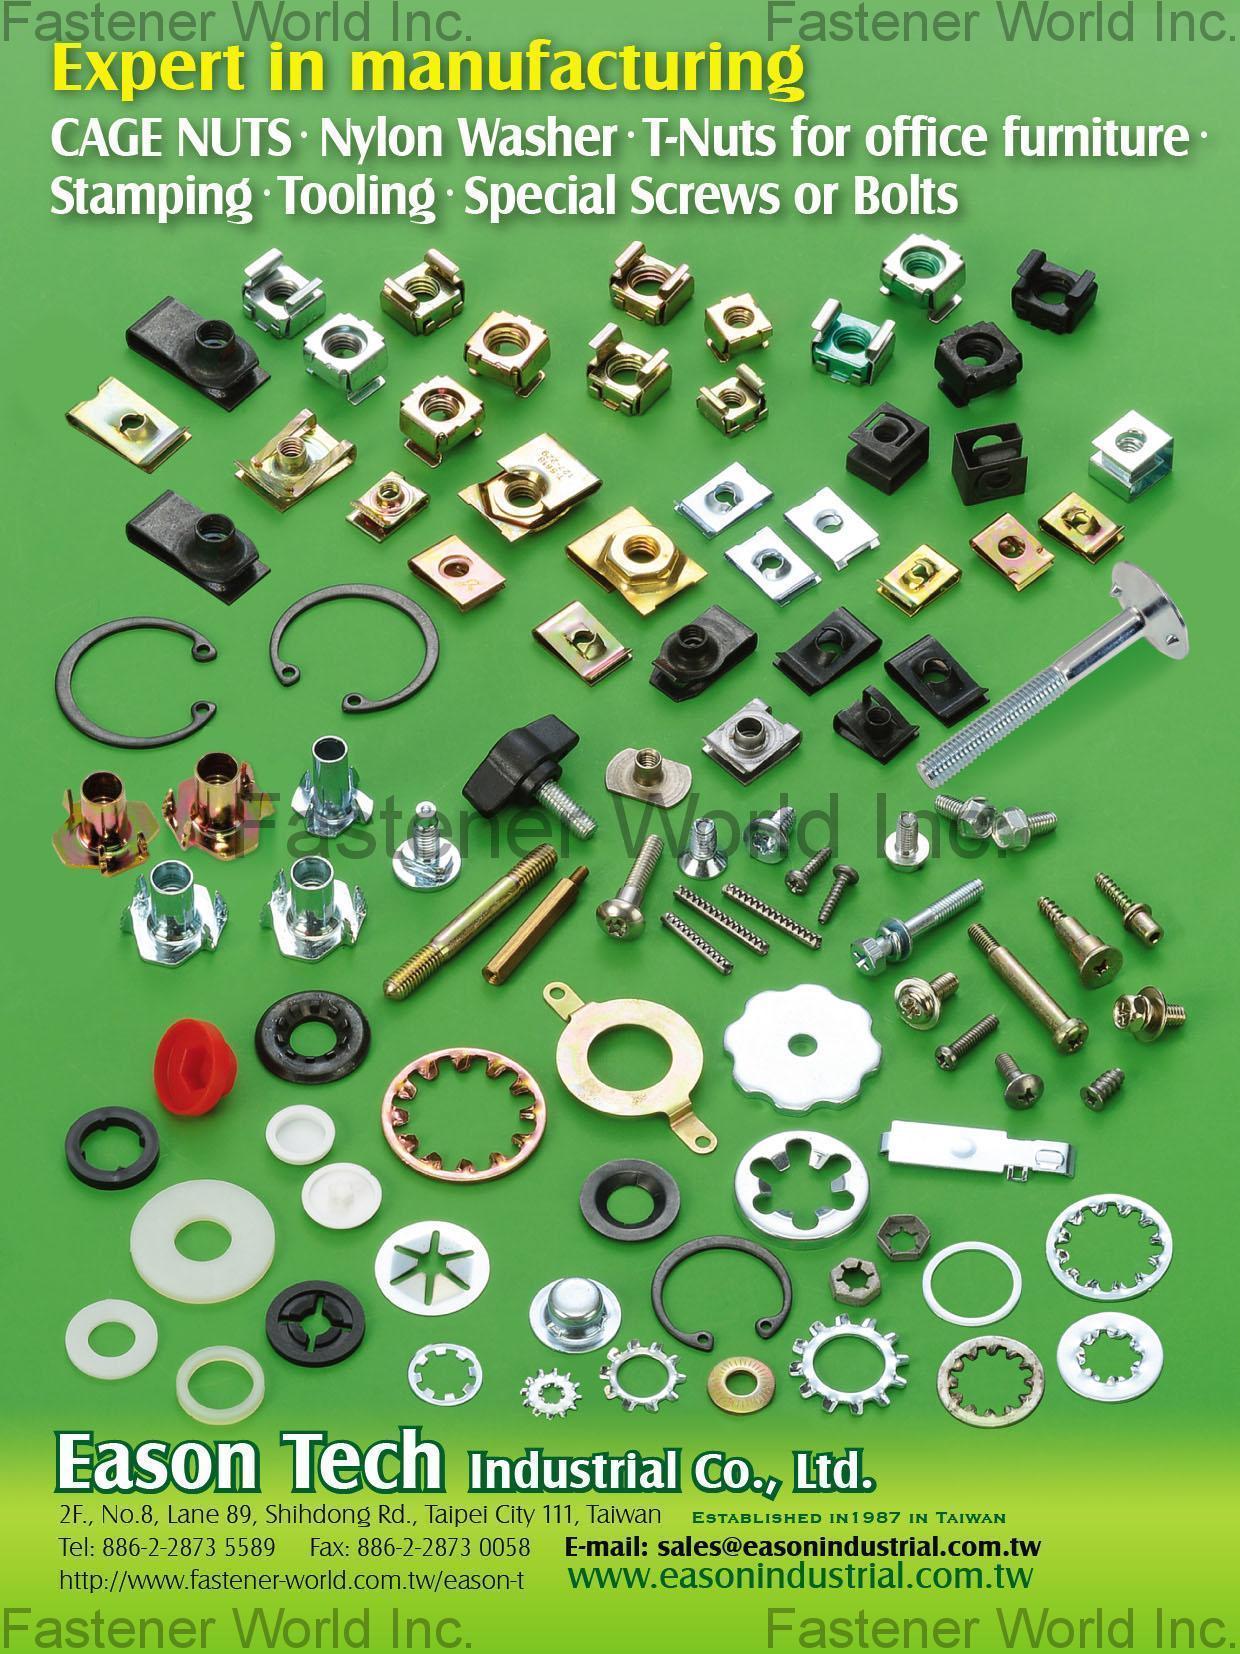 EASON TECH INDUSTRIAL CO., LTD.  , Nylon Washer, T-Nuts for Office Furniture, Stamping, Tooling, Special Screws / Bolts , Tee Or T Nuts